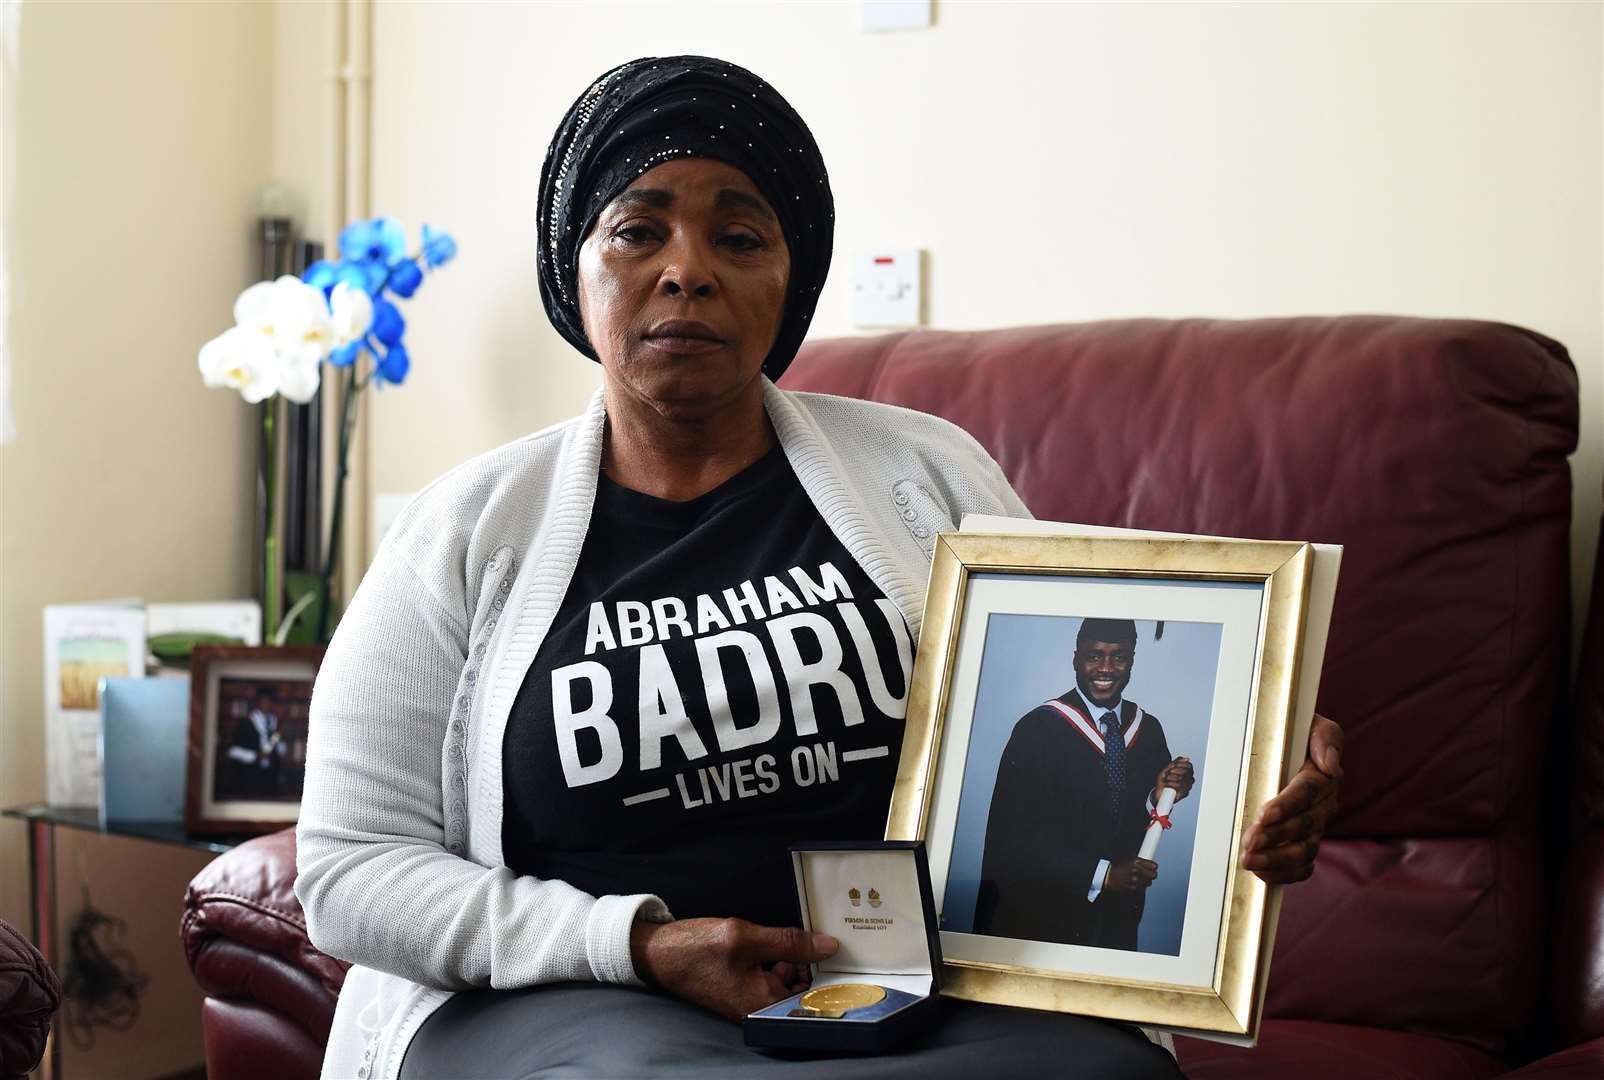 Ronke Badru, the mother of Abraham Badru who was shot dead. His murder remains unsolved (Kirsty O’Connor/PA)